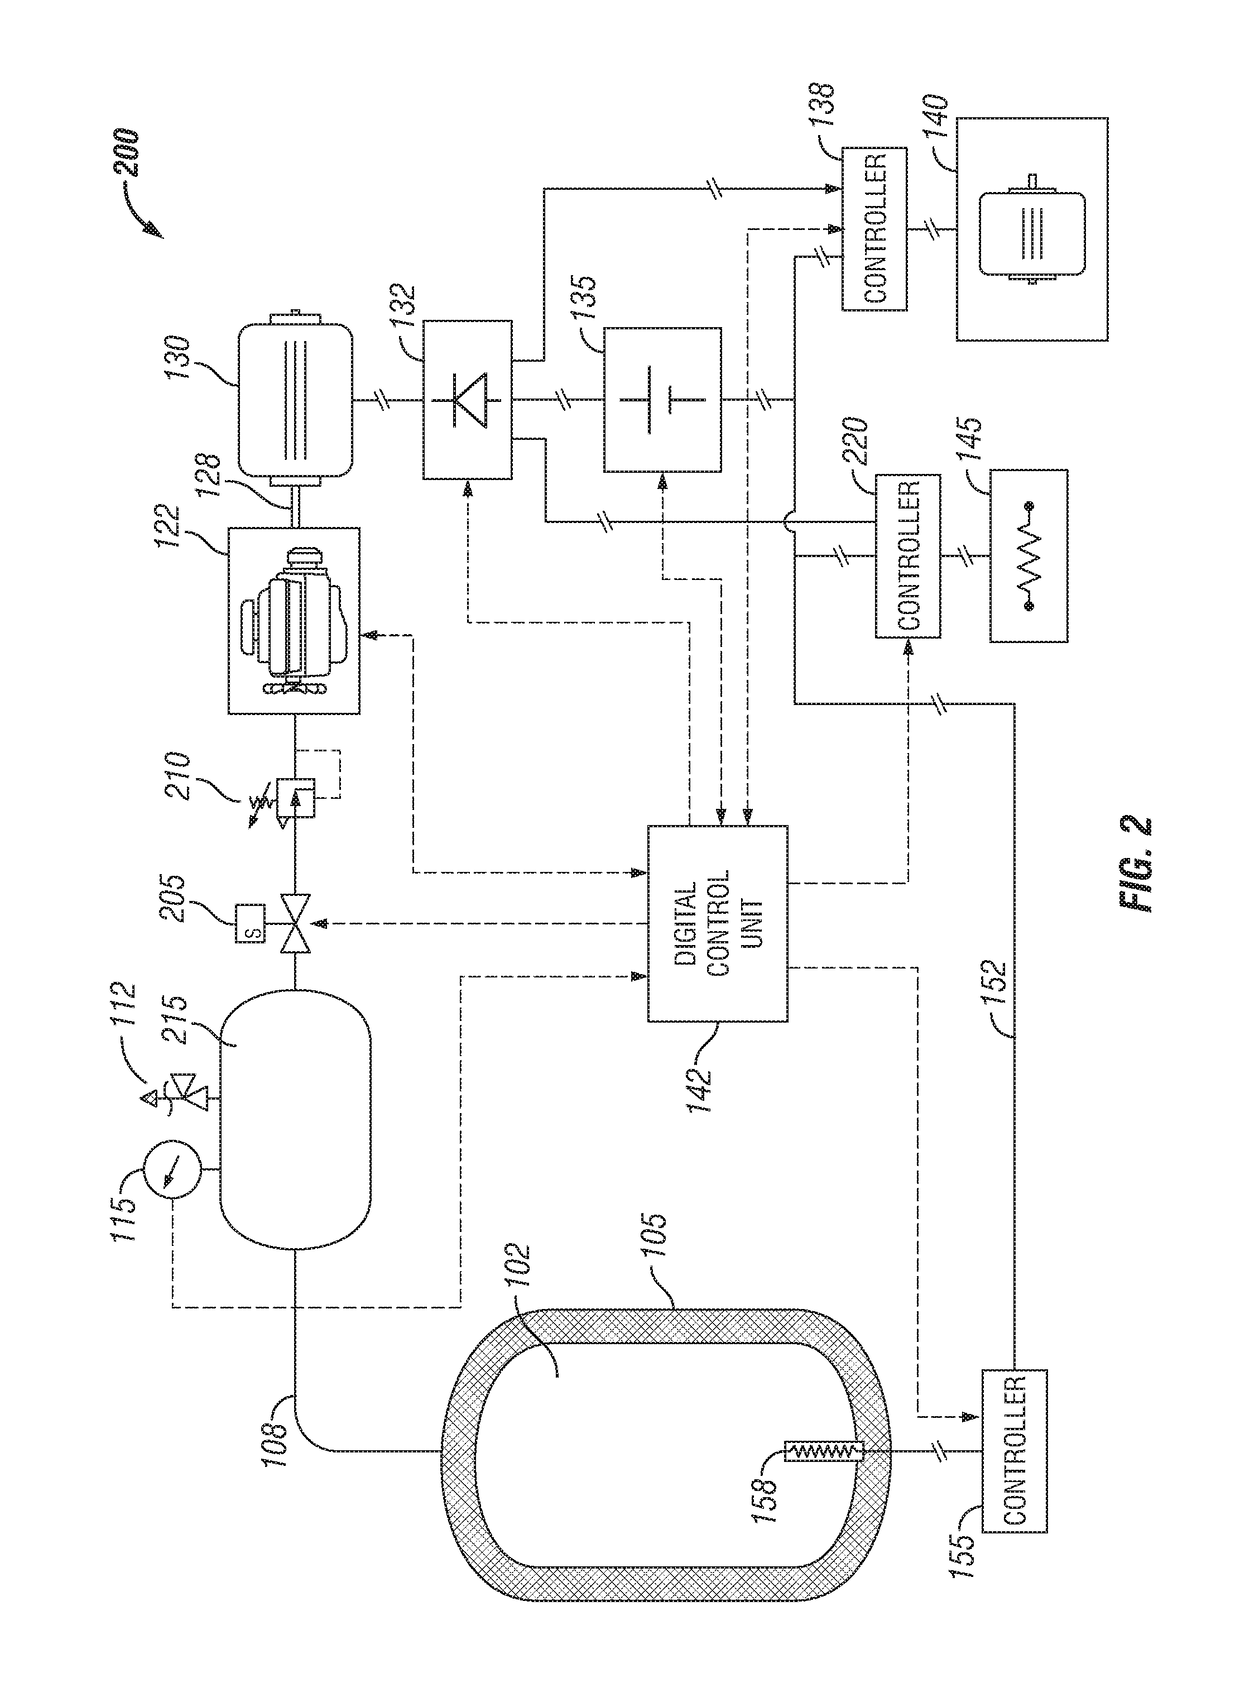 Liquified light hydrocarbon fuel system for a hybrid electric vehicle